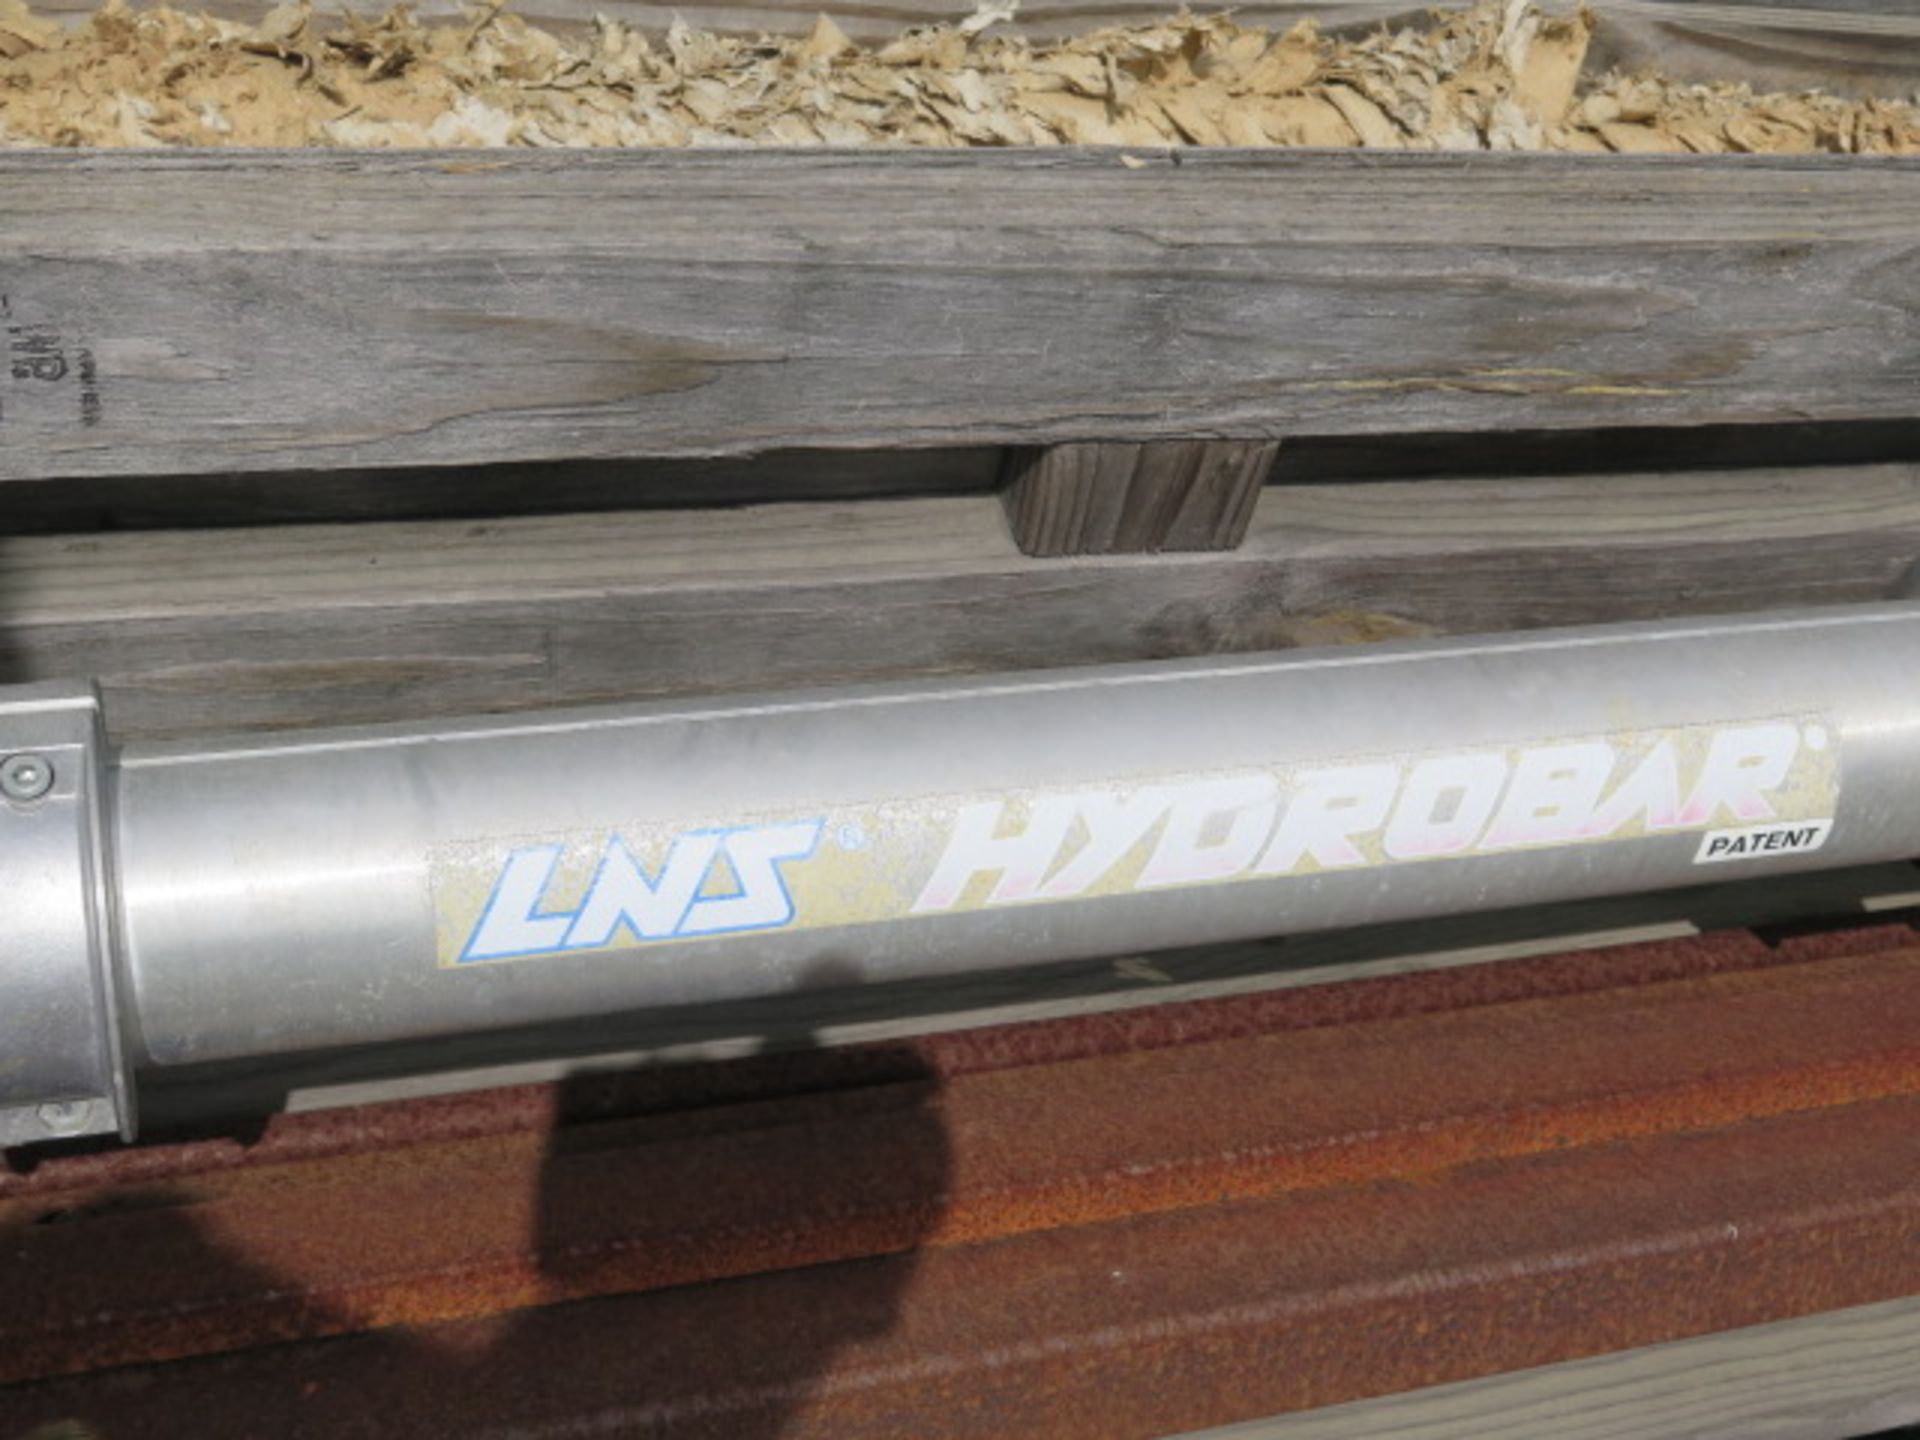 LNS Hydrobar Hydraulic Bar Feed (SOLD AS-IS - NO WARRANTY) (Located at 2091 Fortune Dr., San Jose) - Image 7 of 8